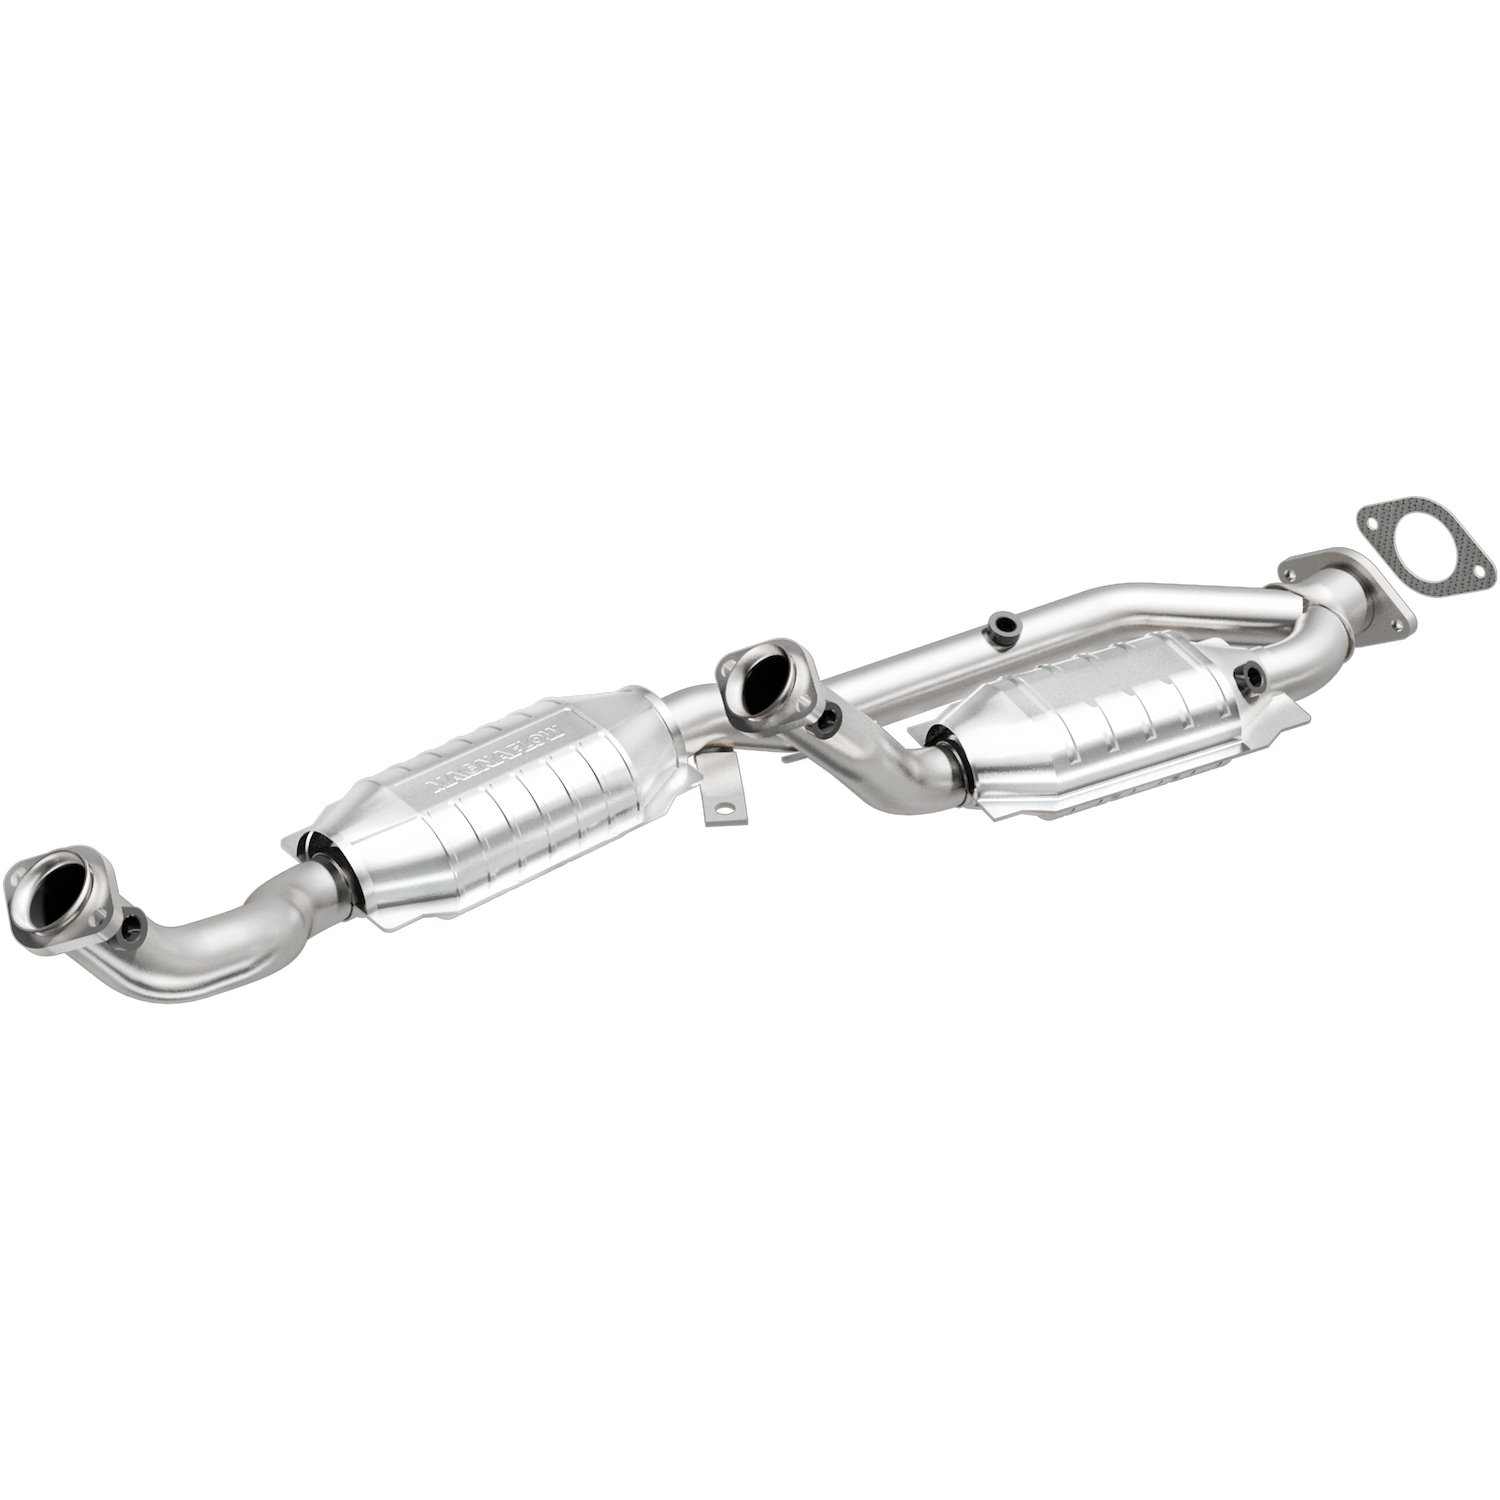 1999-2000 Ford Windstar California Grade CARB Compliant Direct-Fit Catalytic Converter